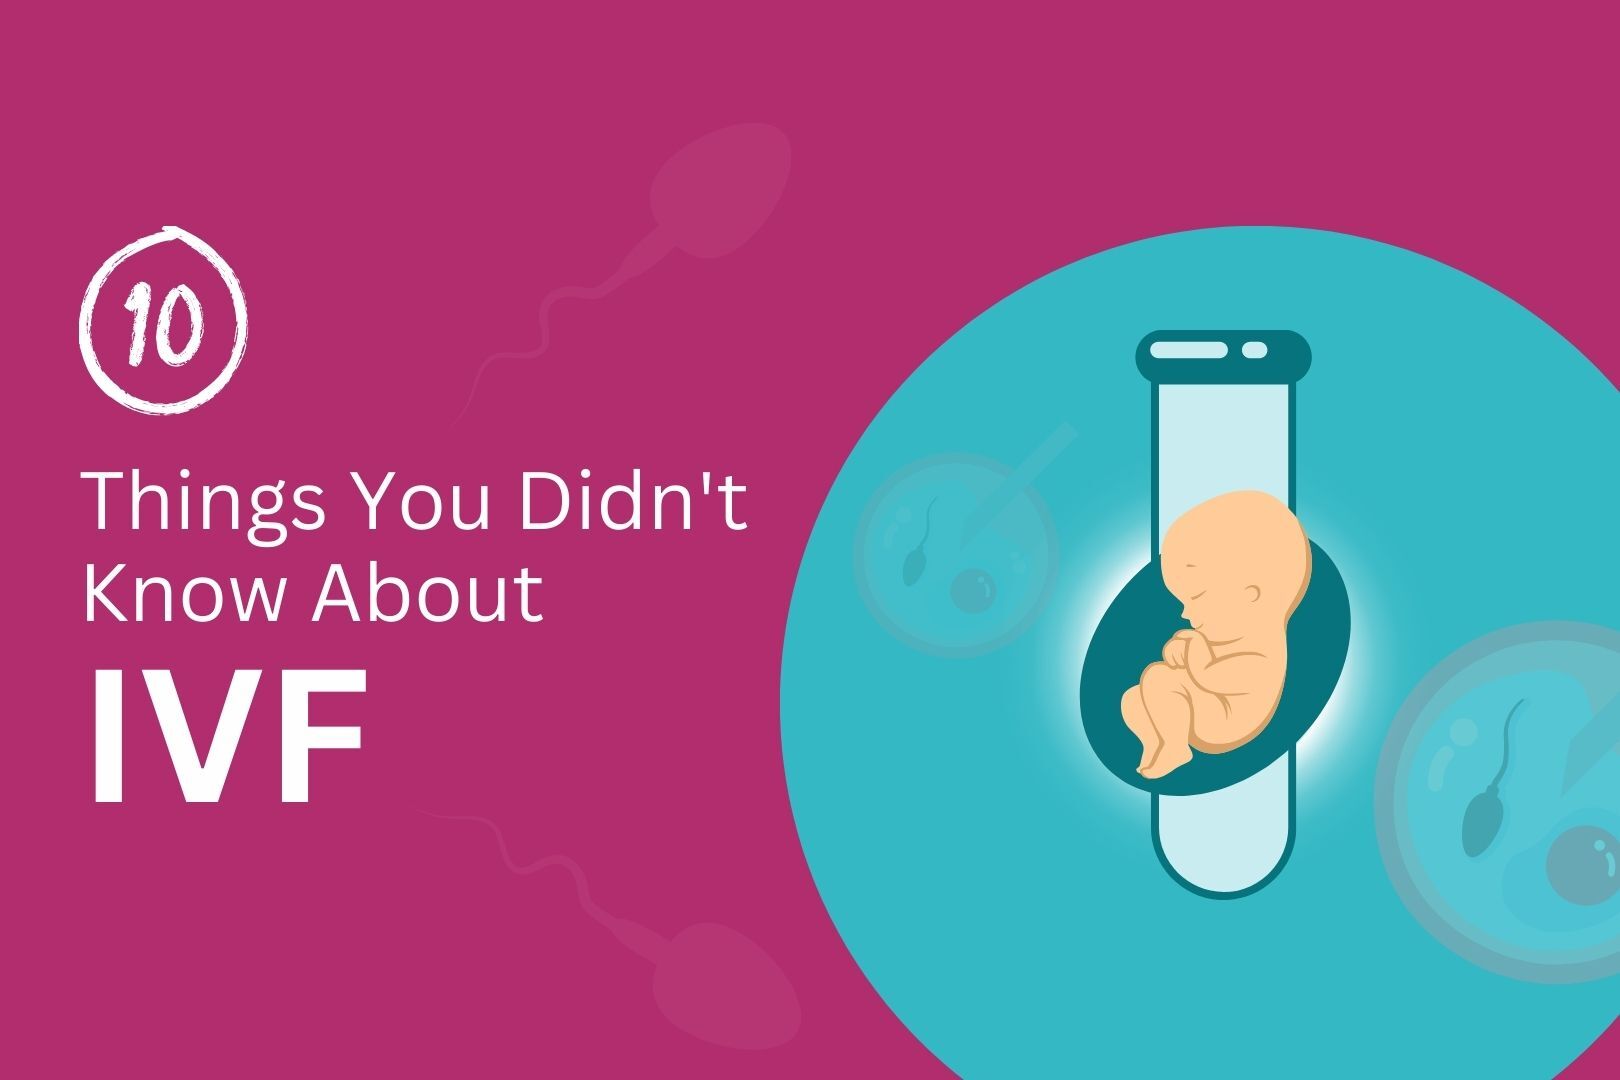 10 Things You Didn't Know About IVF